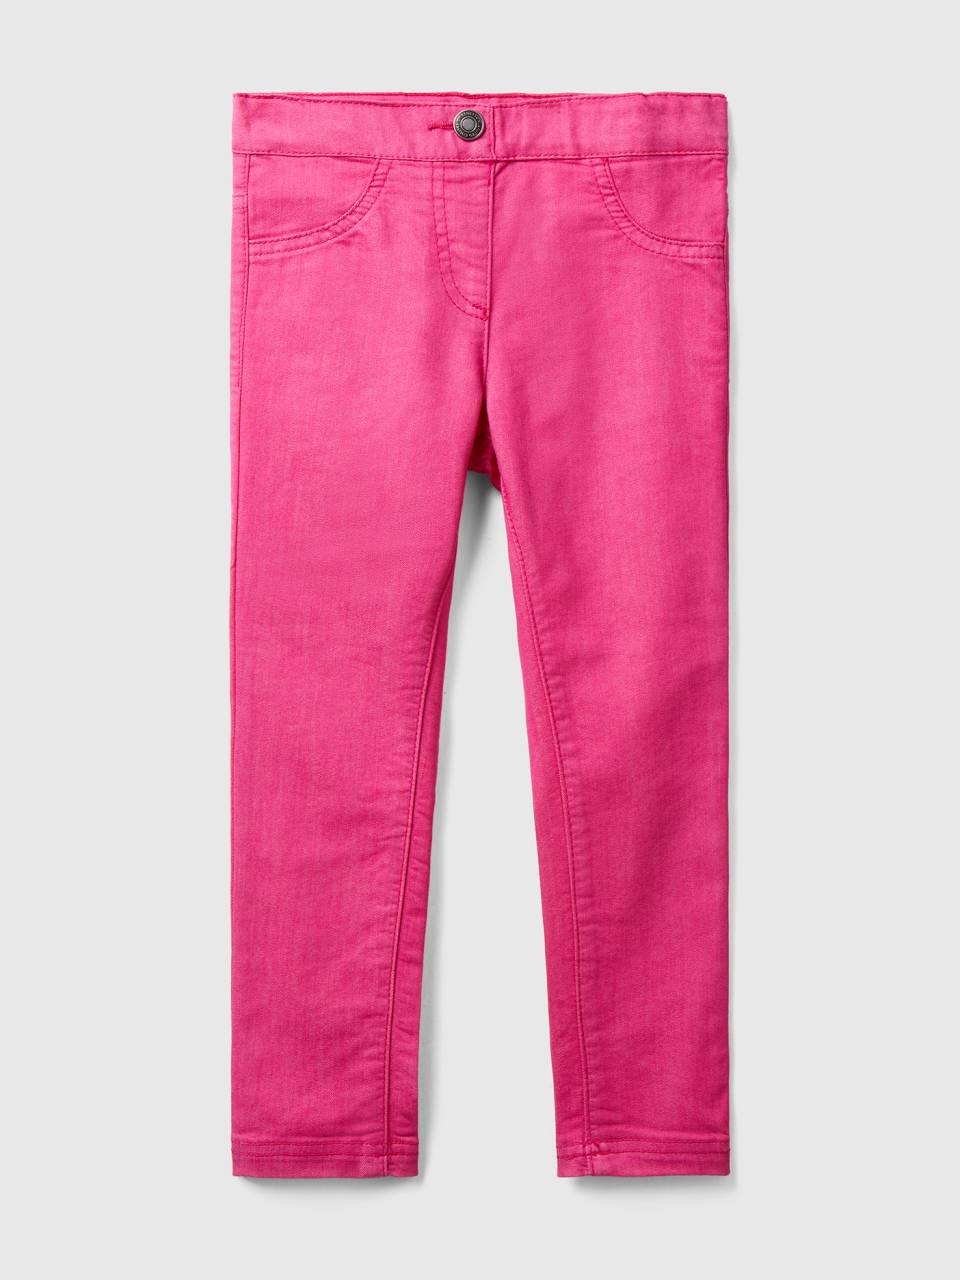 Benetton jeggings in stretch cotton blend. 1